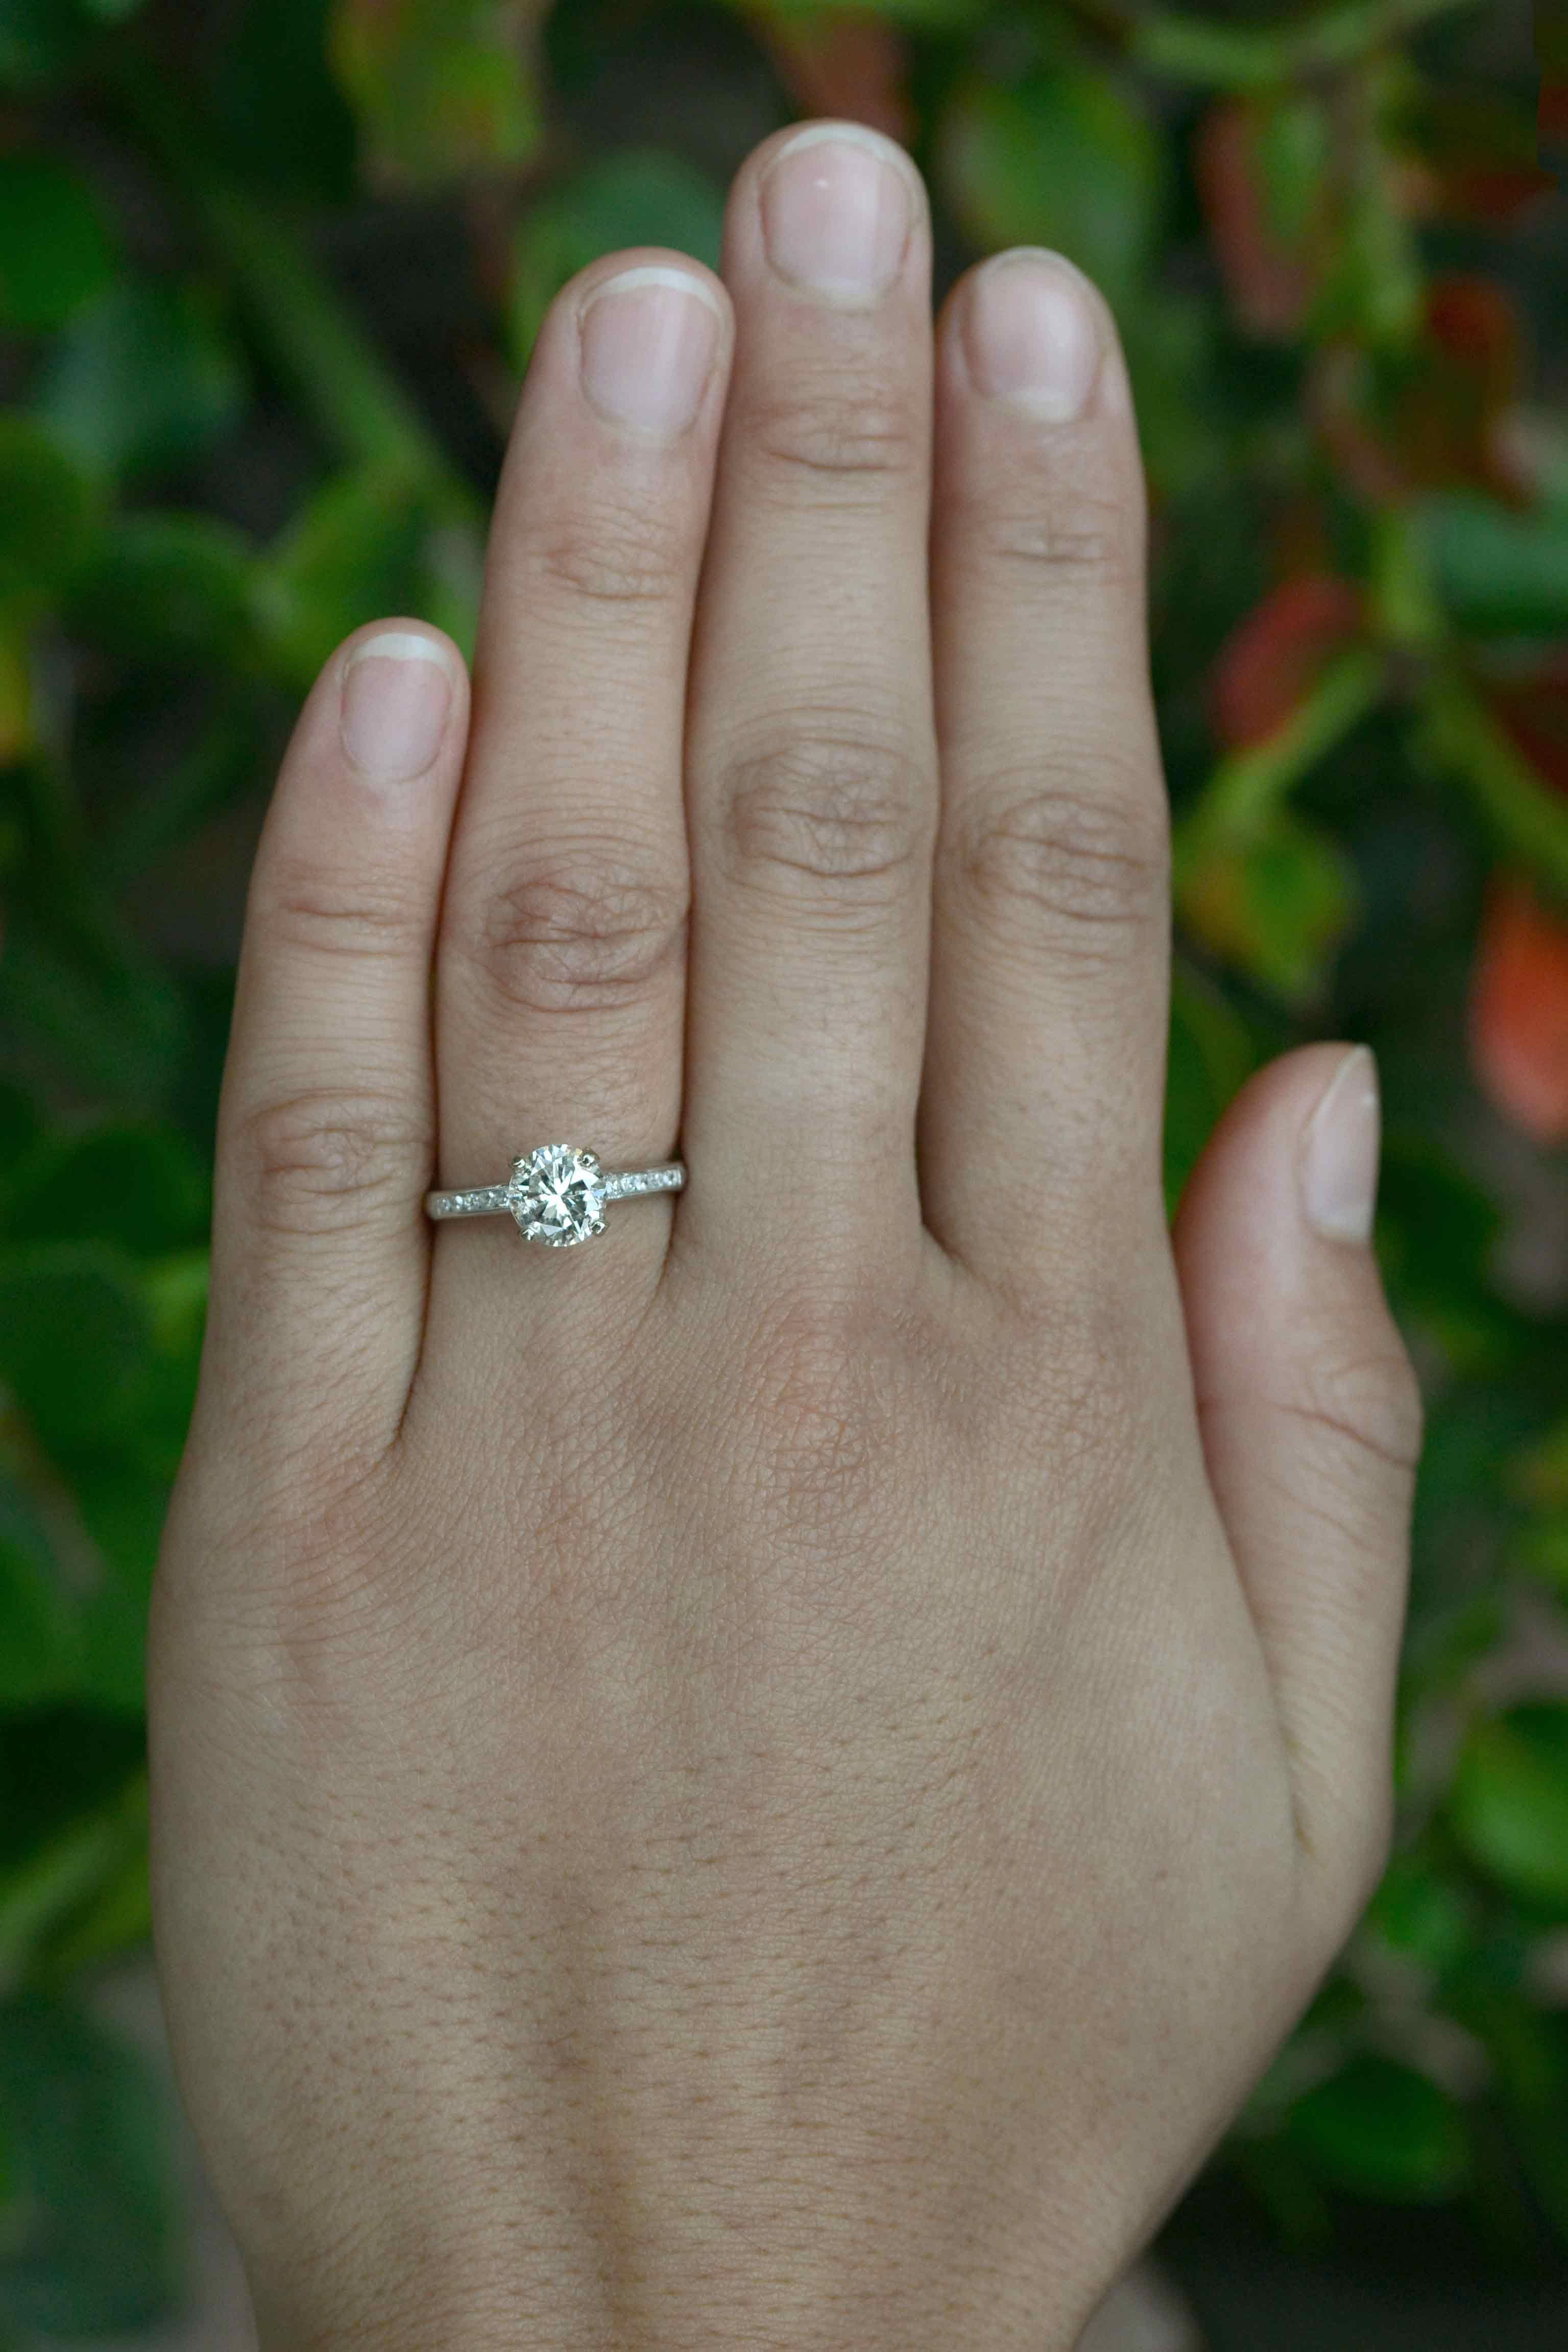 Abilene Vintage Mid Century 1960s diamond solitaire engagement ring. A timeless classic centering on a captivating, brilliant 1.27 Carat brilliant cut with a pleasing, warm, sparkling personality.

You'll love how the simple platinum band, adorned